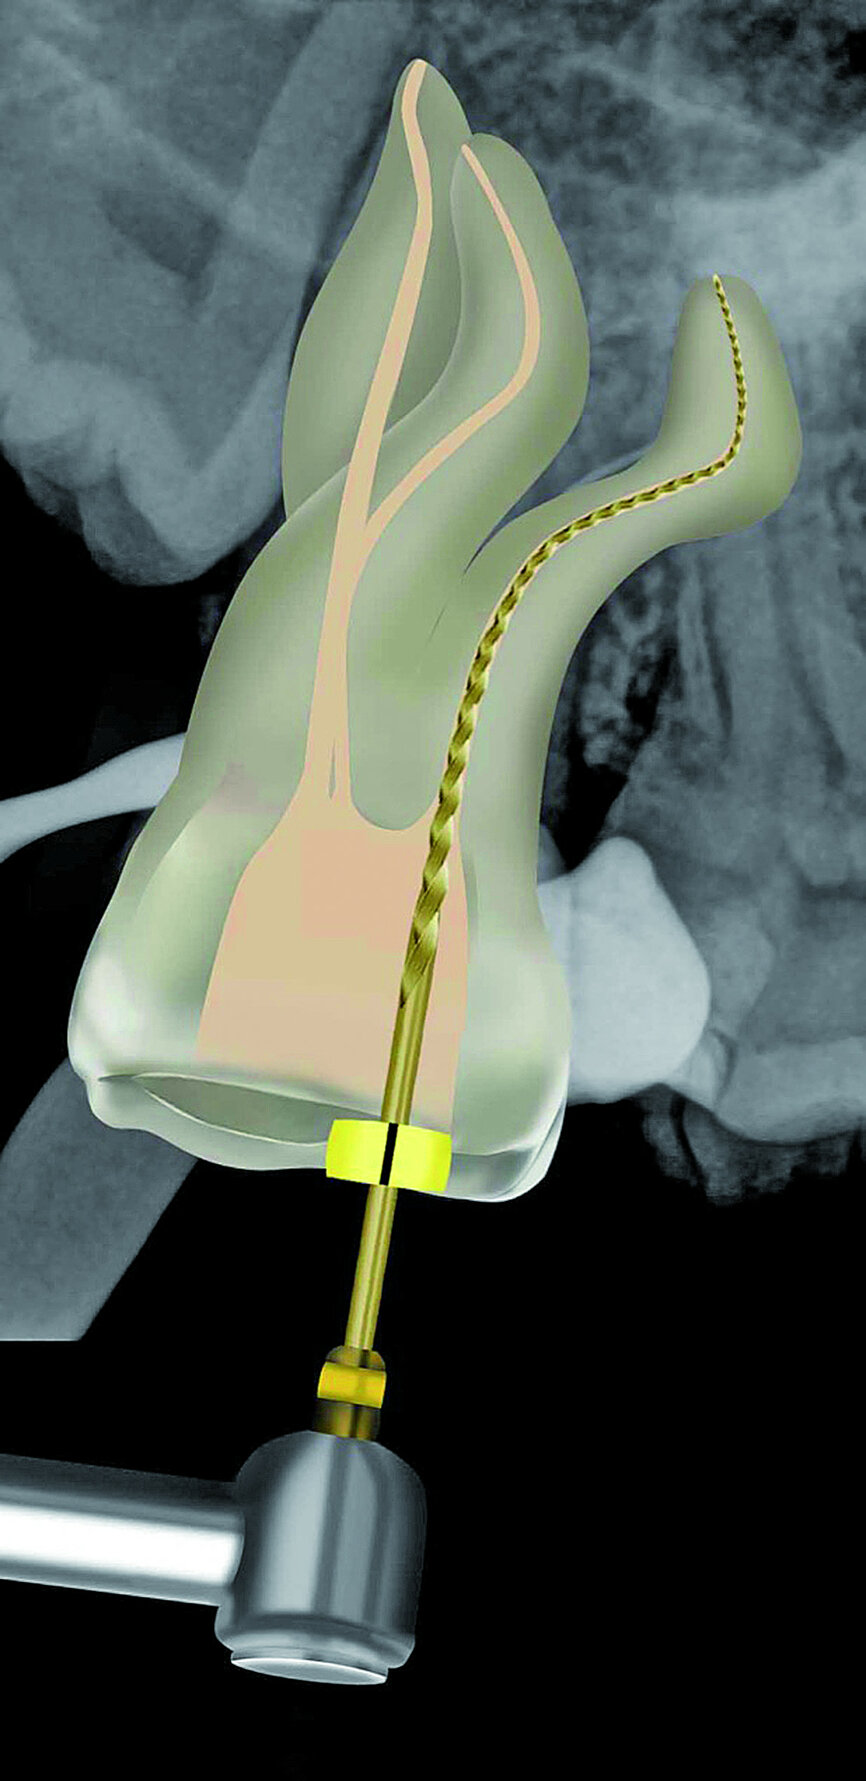 Fig. 27: The Small WaveOne Gold file (20/07) was used to complete canal preparation in the two buccal root canal systems.